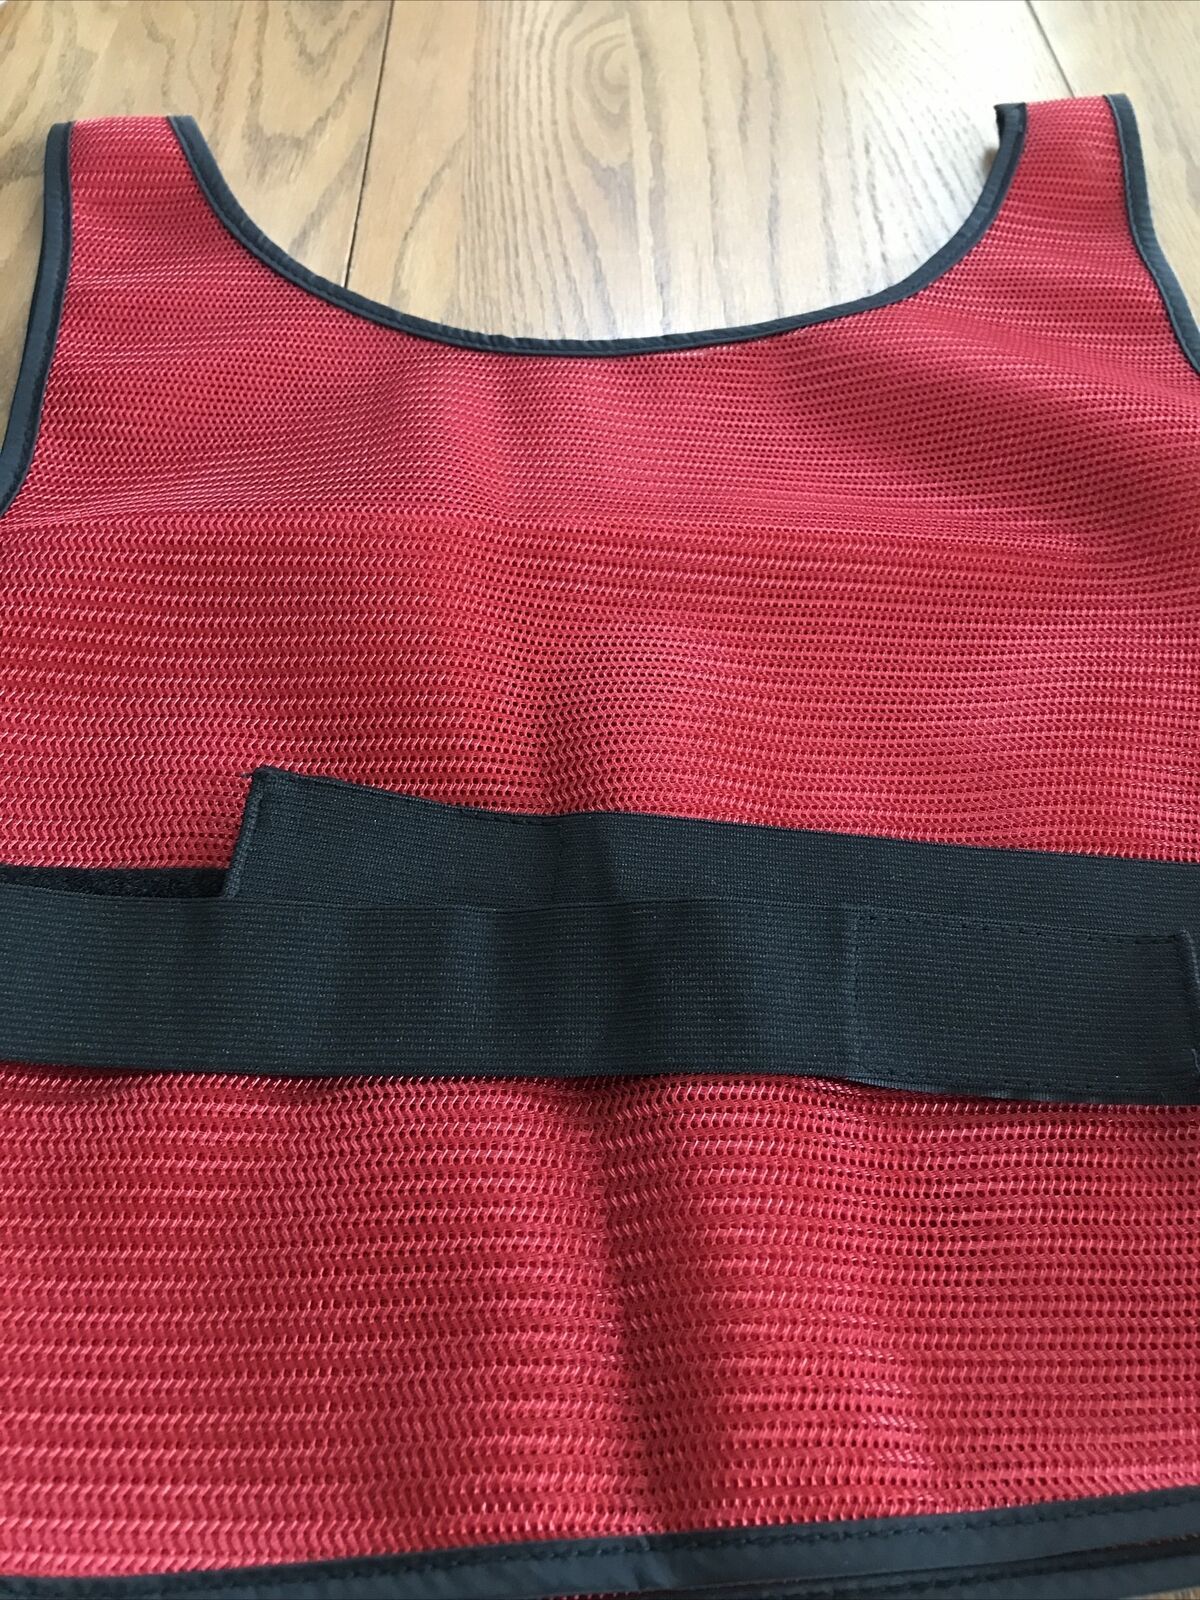 Primary image for scrimmage vest scarlet . Ship In 24 Hours